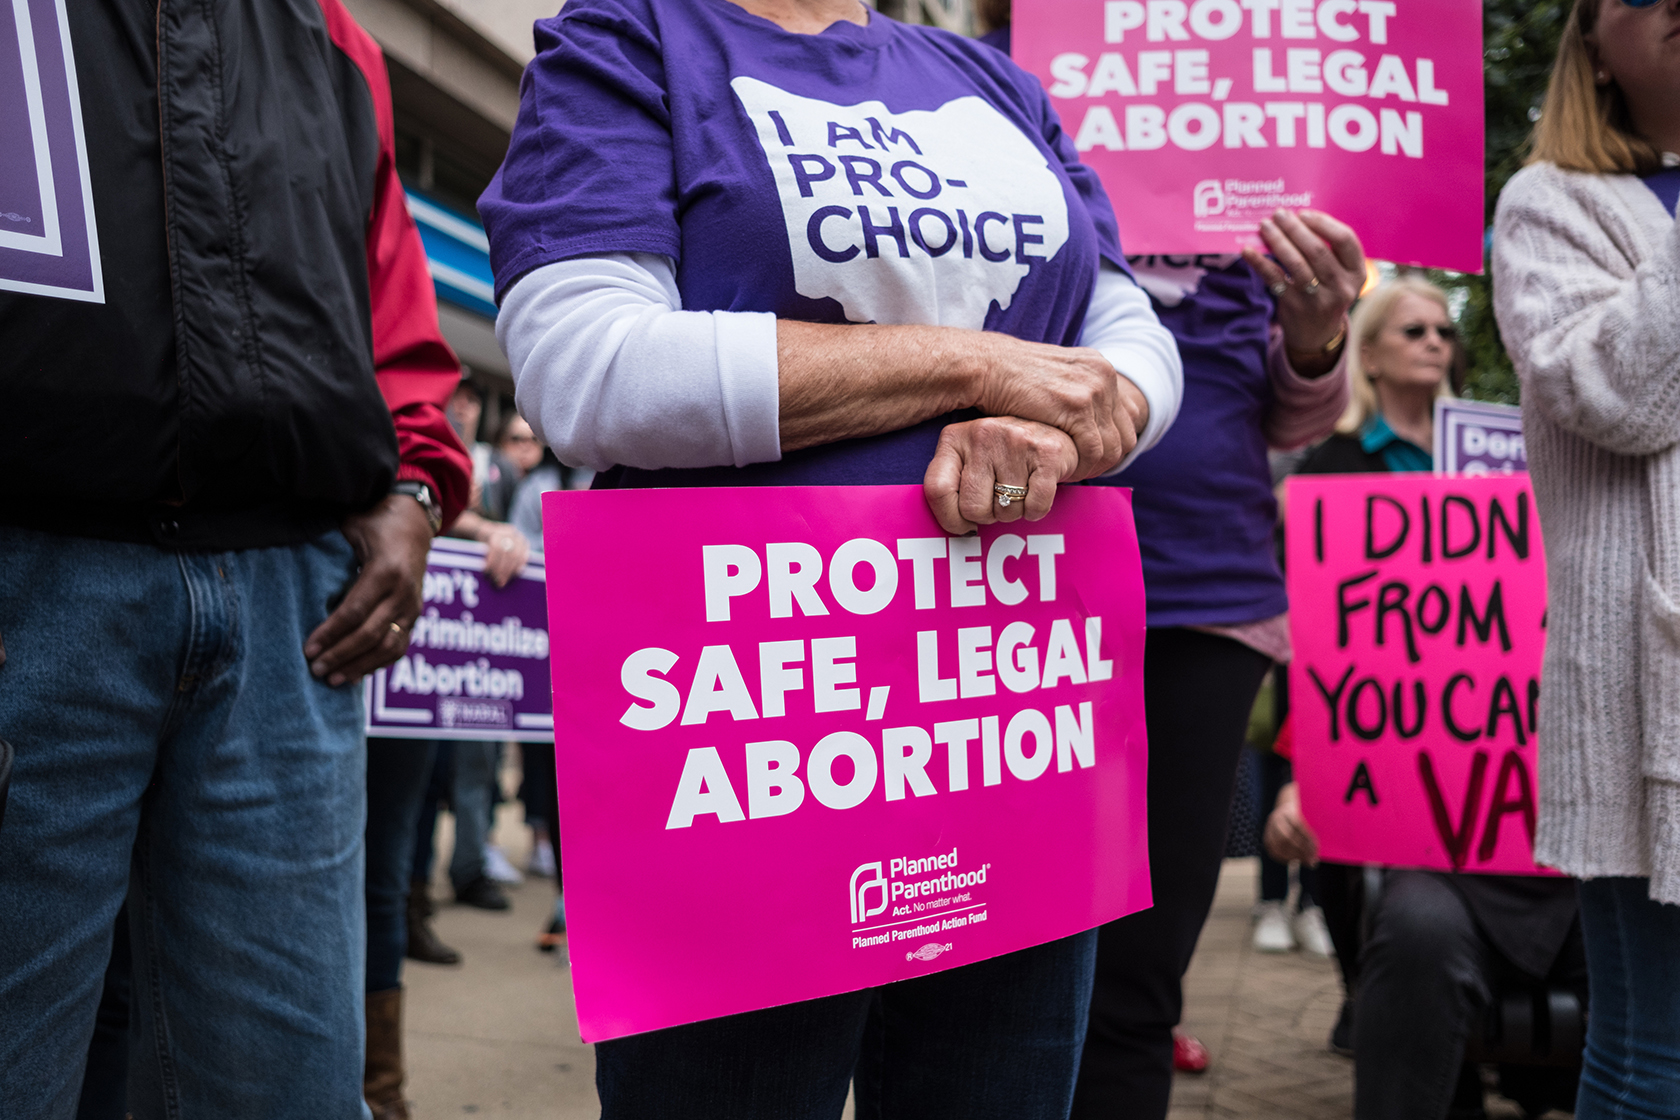 An activist seen holding a placard that says protect safe, legal abortion.